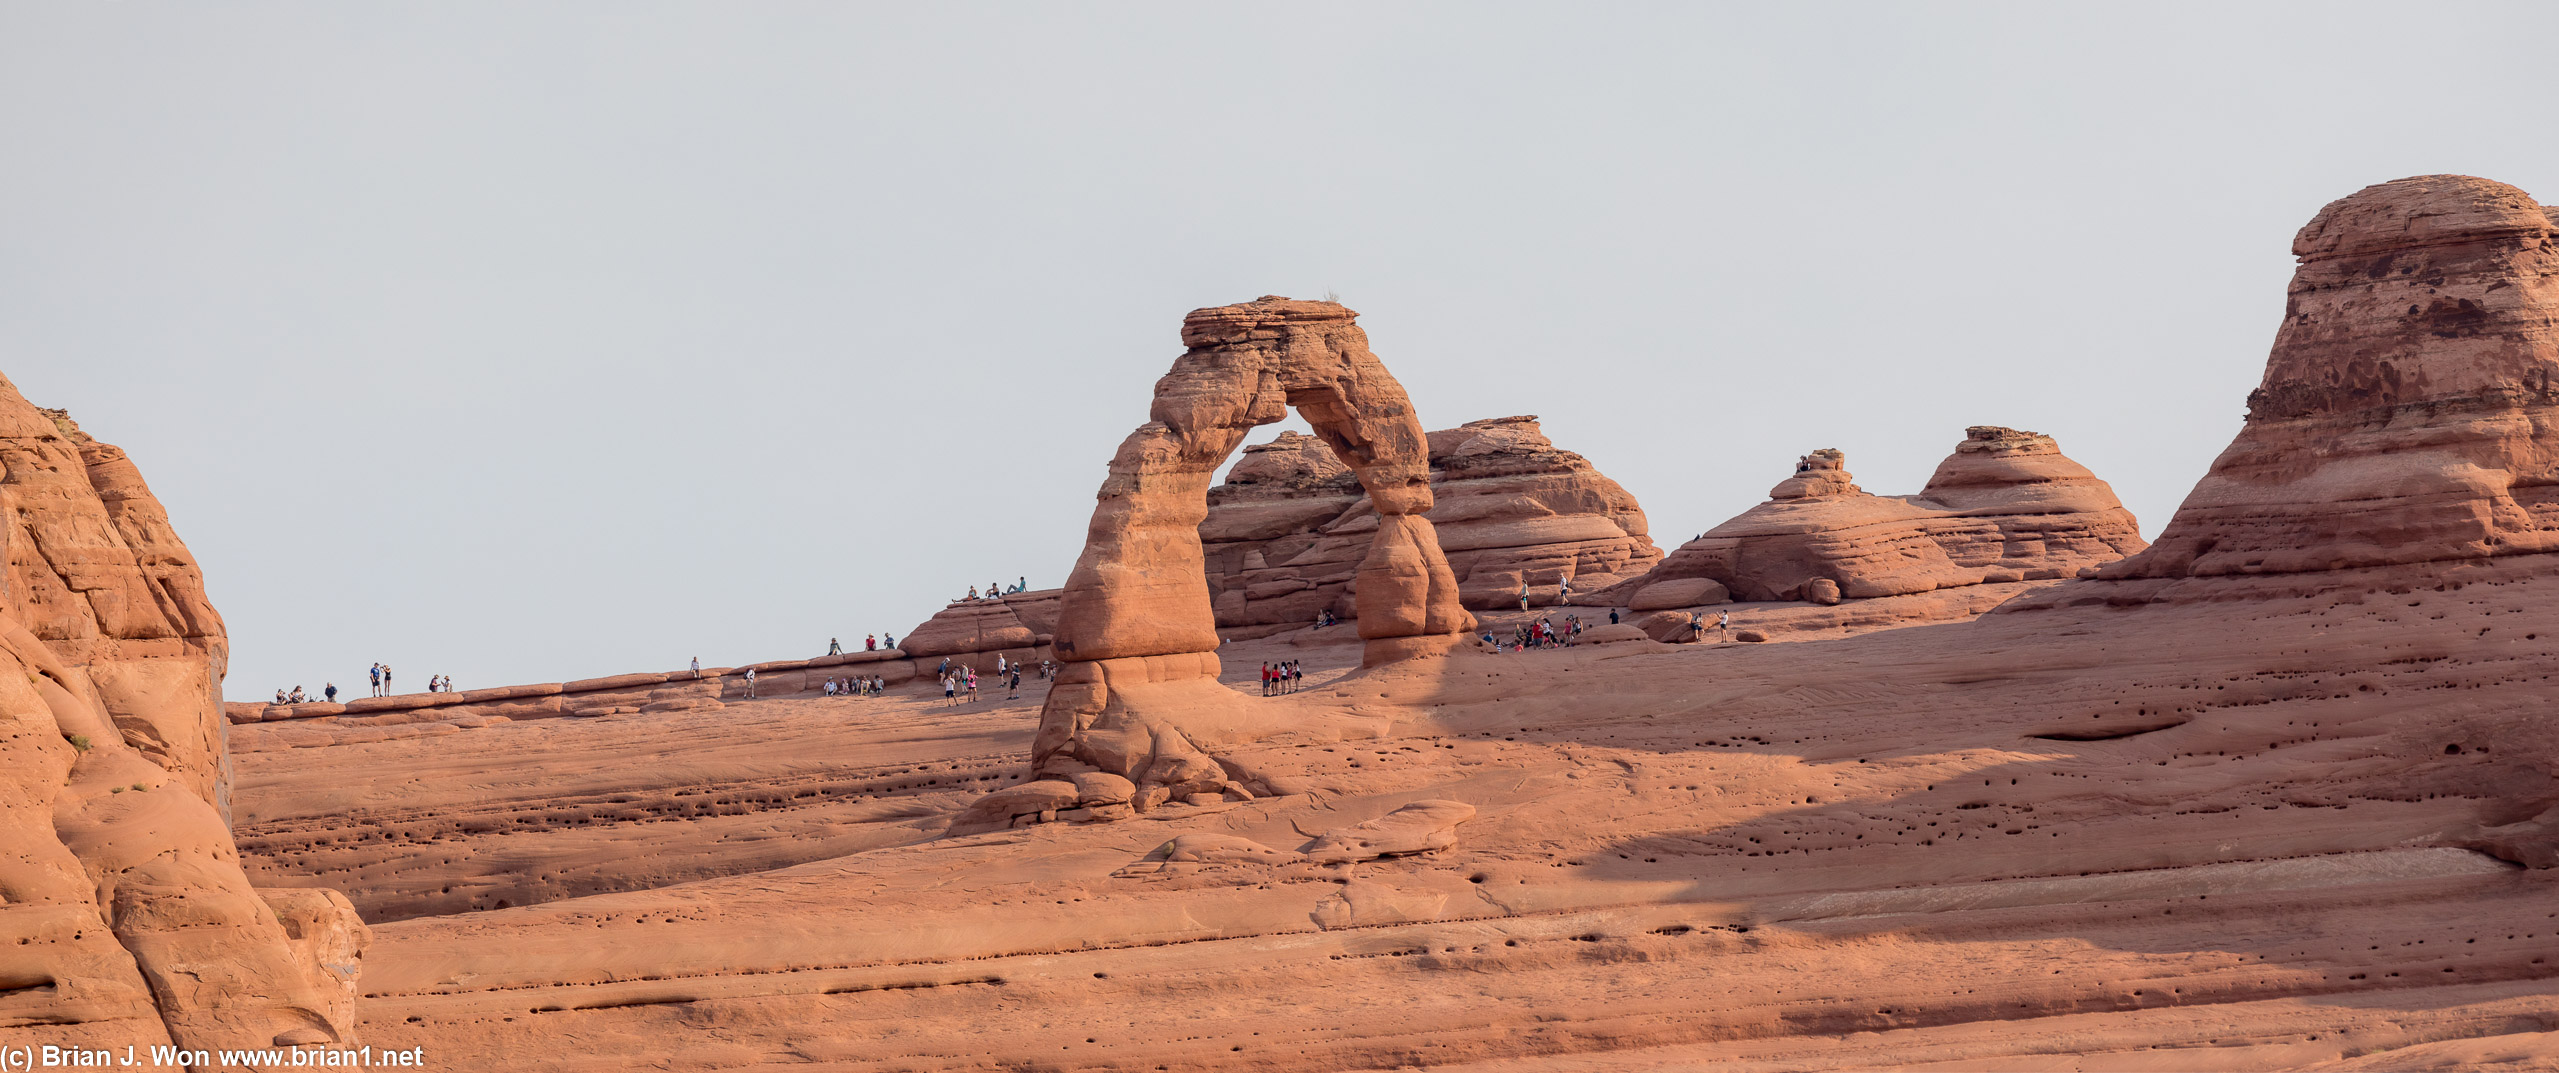 From Delicate Arch Viewpoint, upper location.